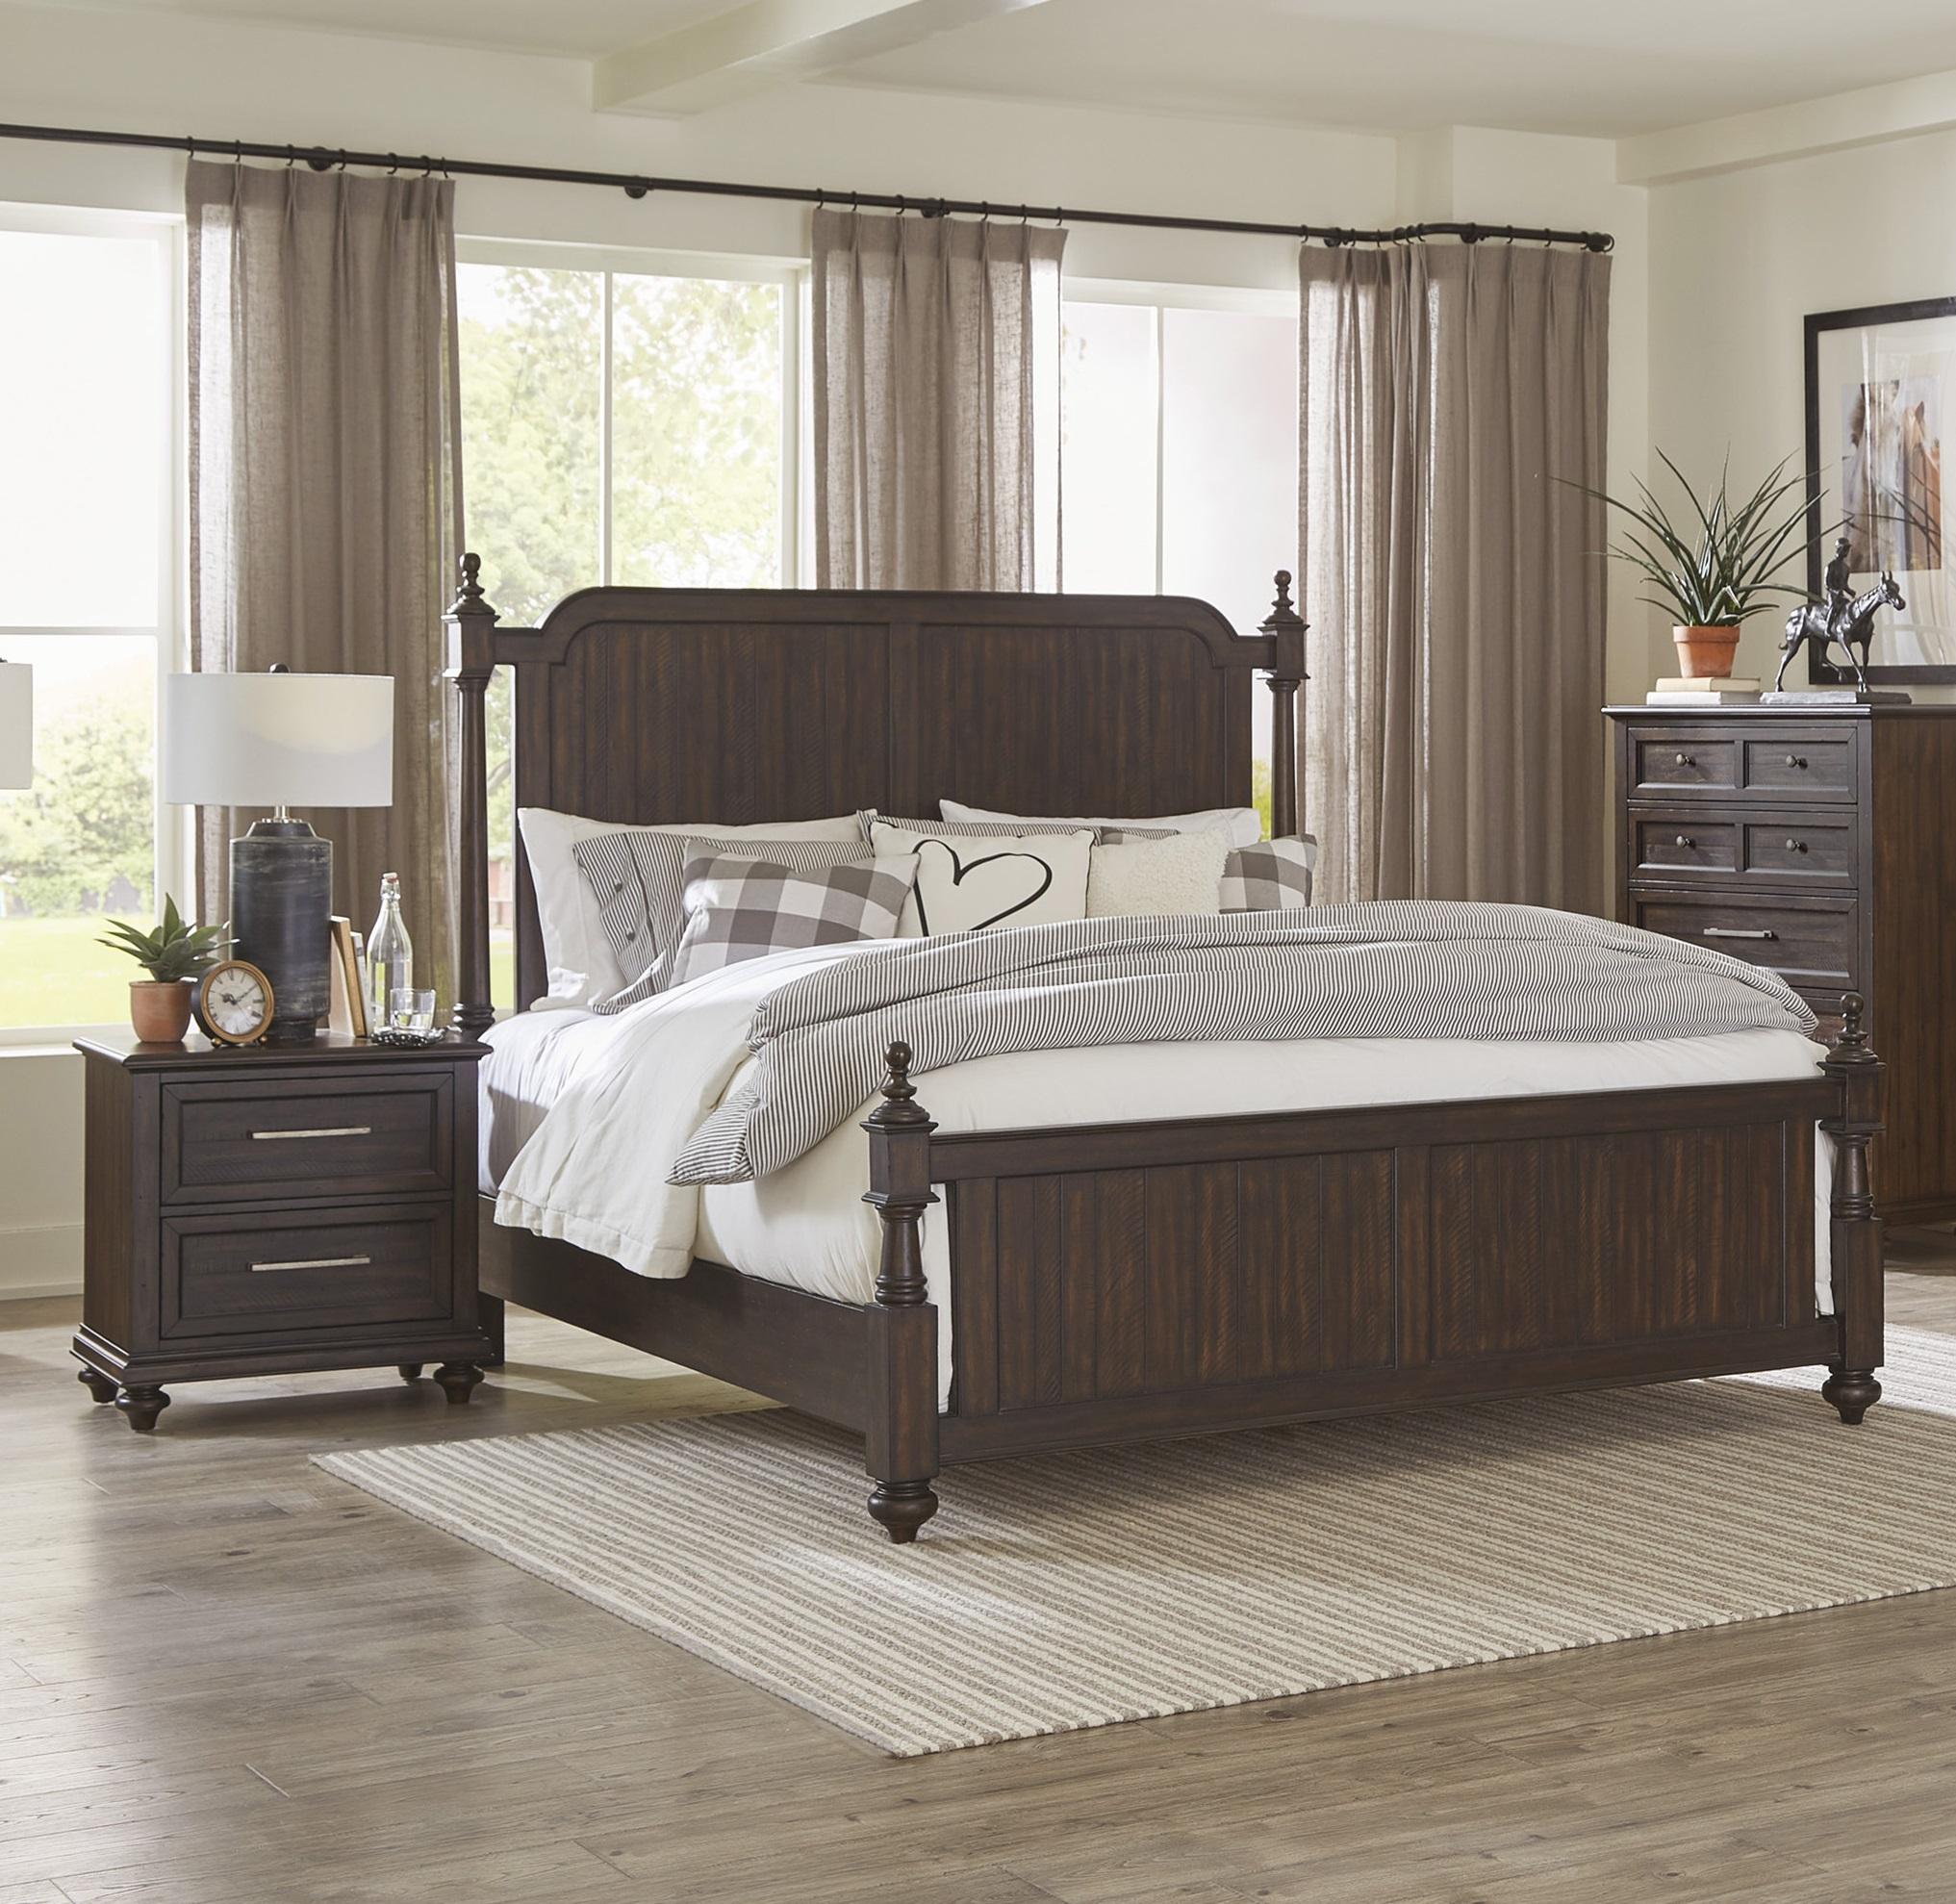 Transitional Bedroom Set 1689PK-1CK-5PC Cardano 1689PK-1CK-5PC in Charcoal 